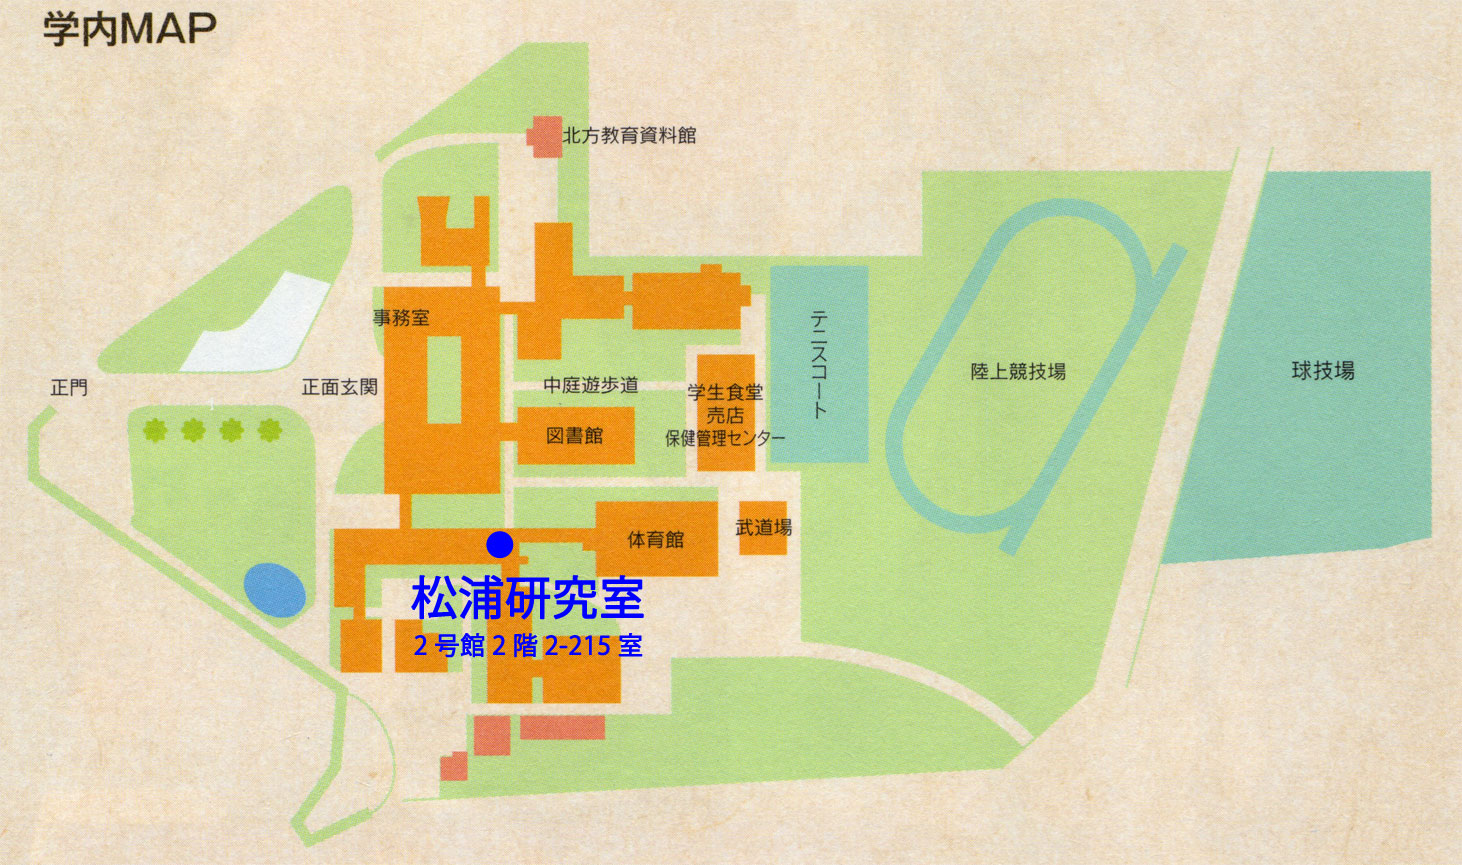 back to Campus Map